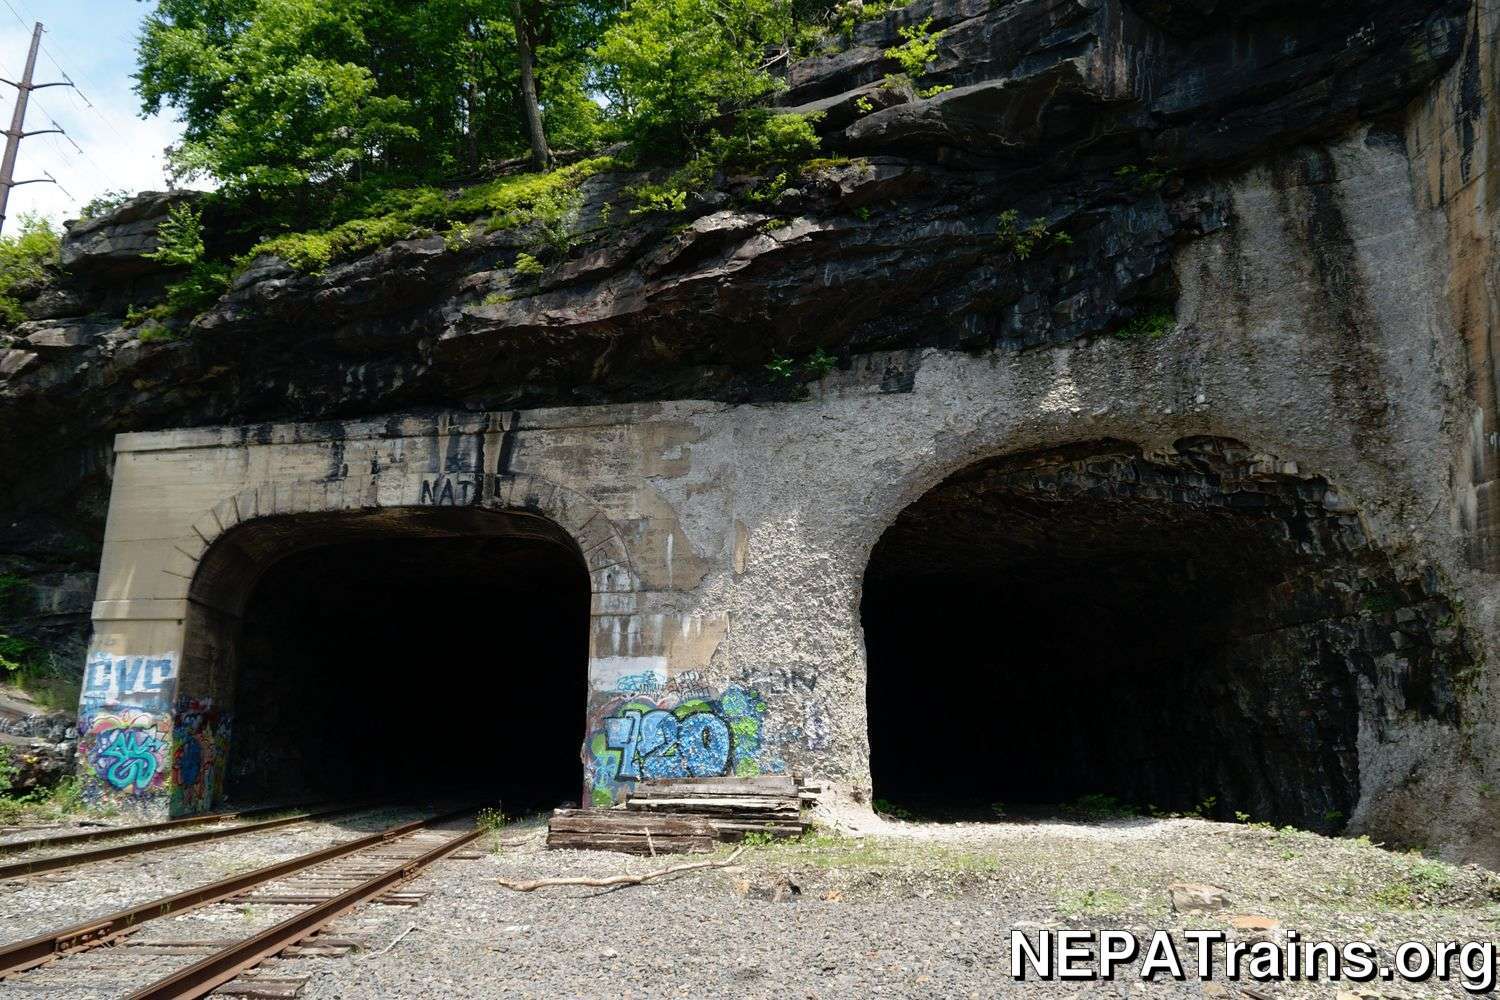 Nay Aug Park Tunnels West Portal (June 2019)